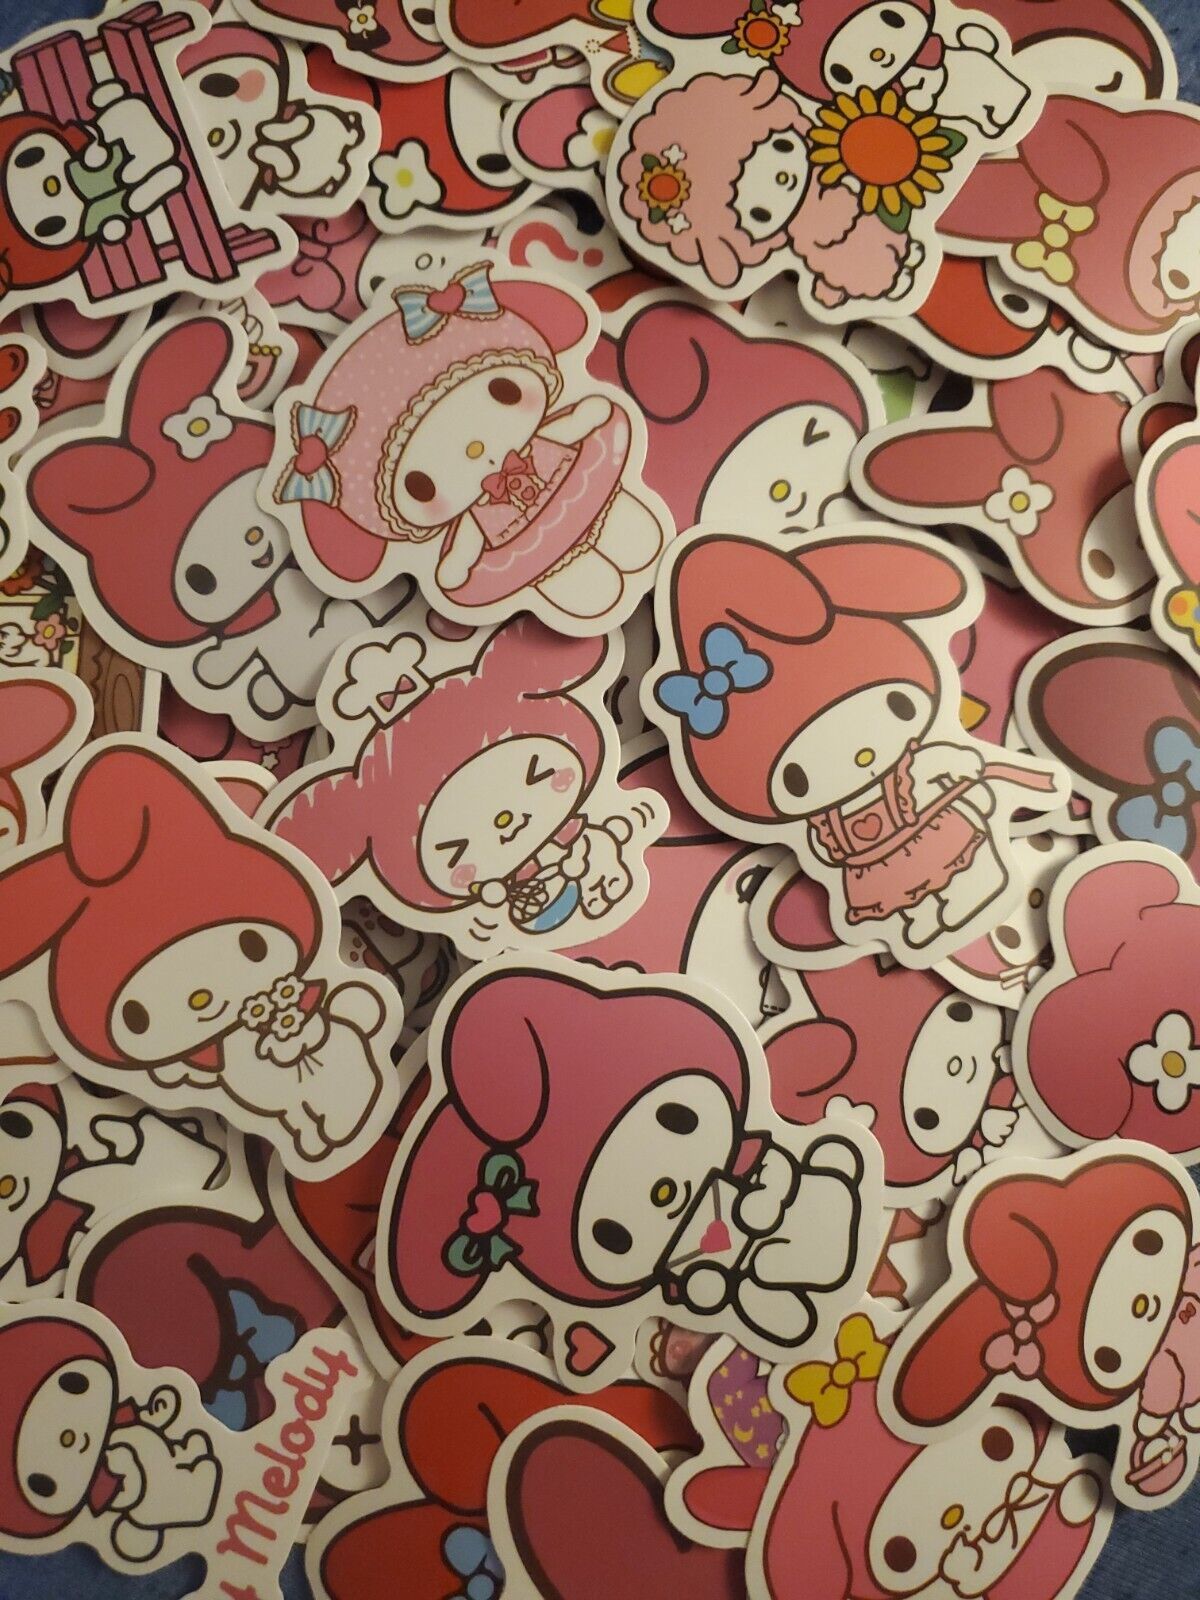 My Melody Stickers - 40 stickers - Die cut - 1.5 inches - My Melody